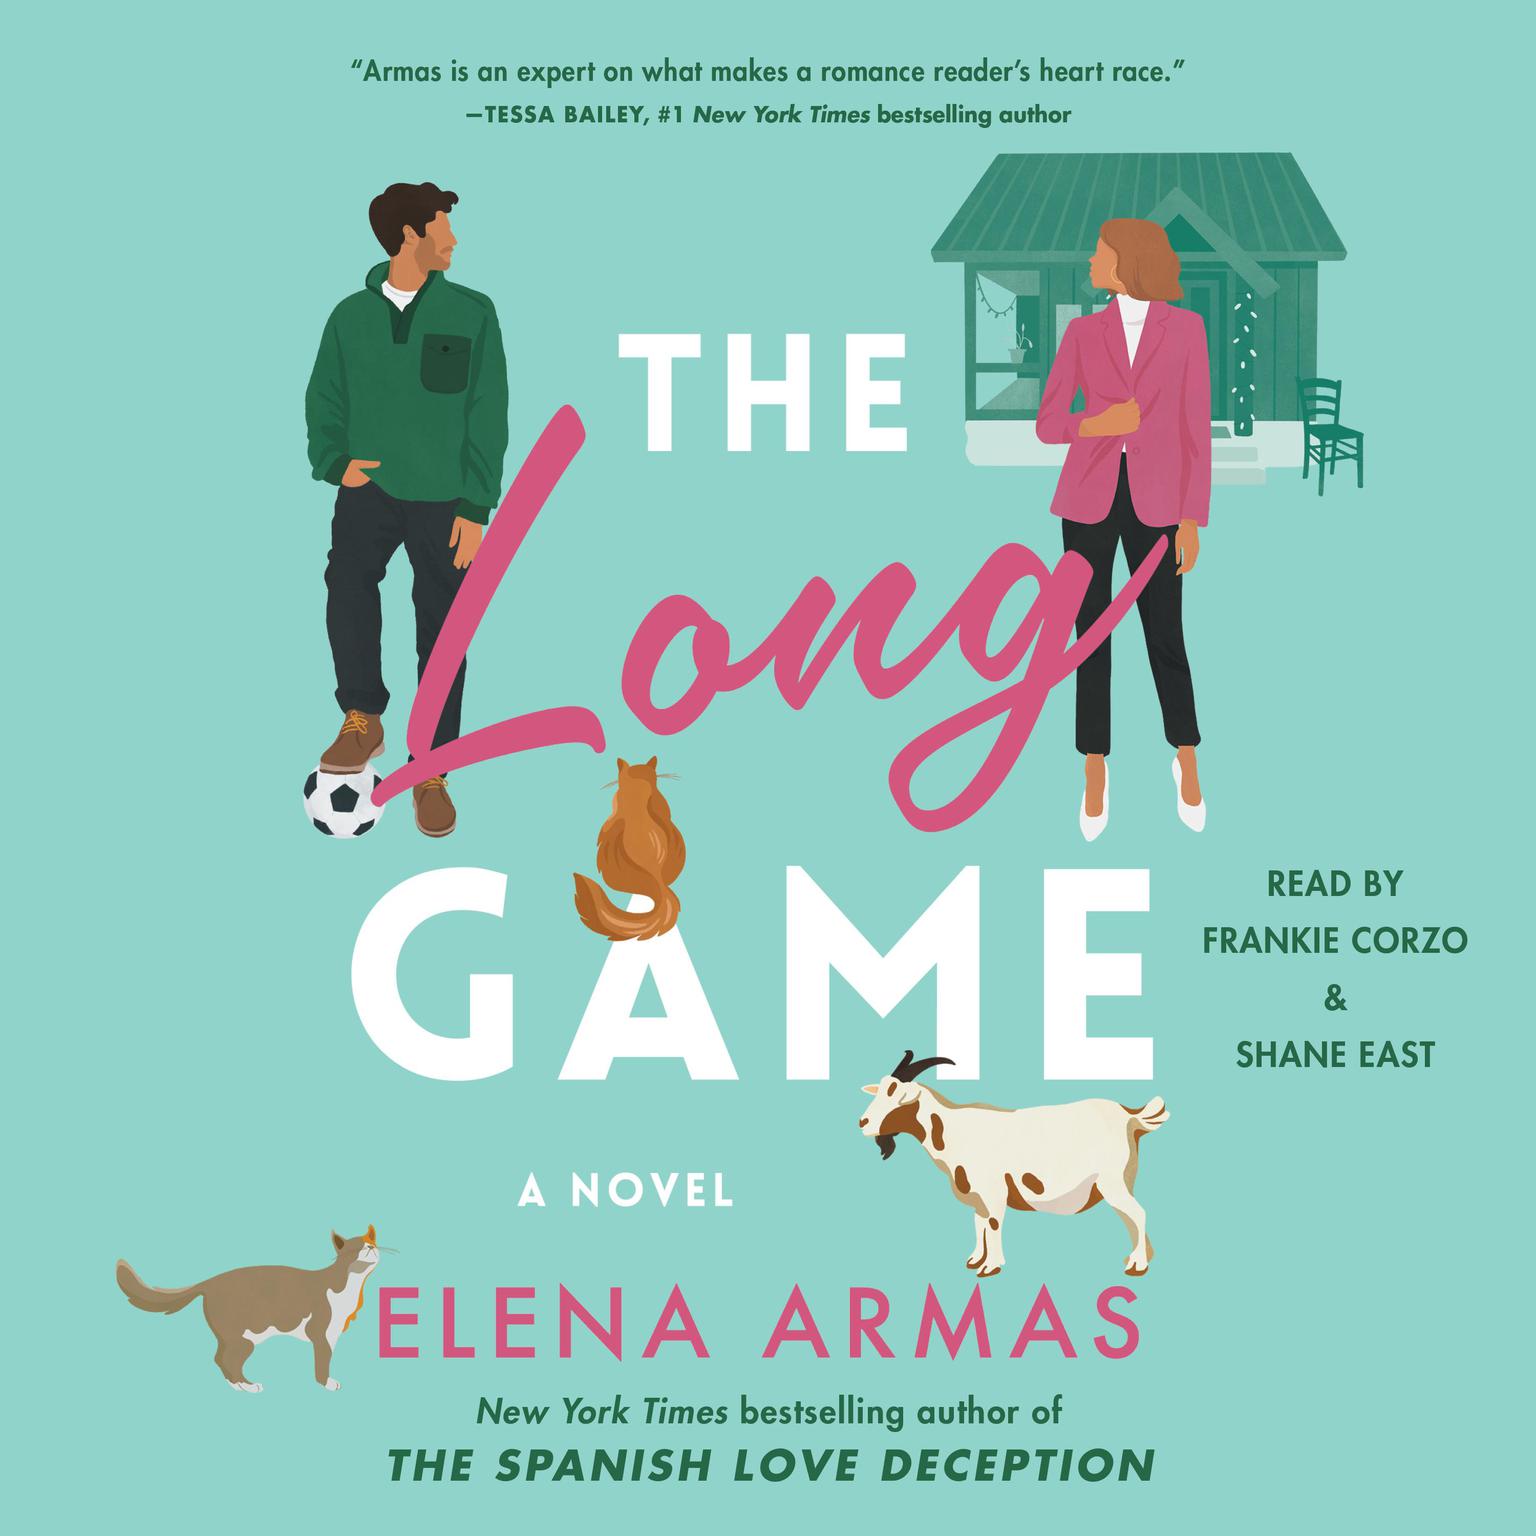 The Long Game Audiobook, by Elena Armas